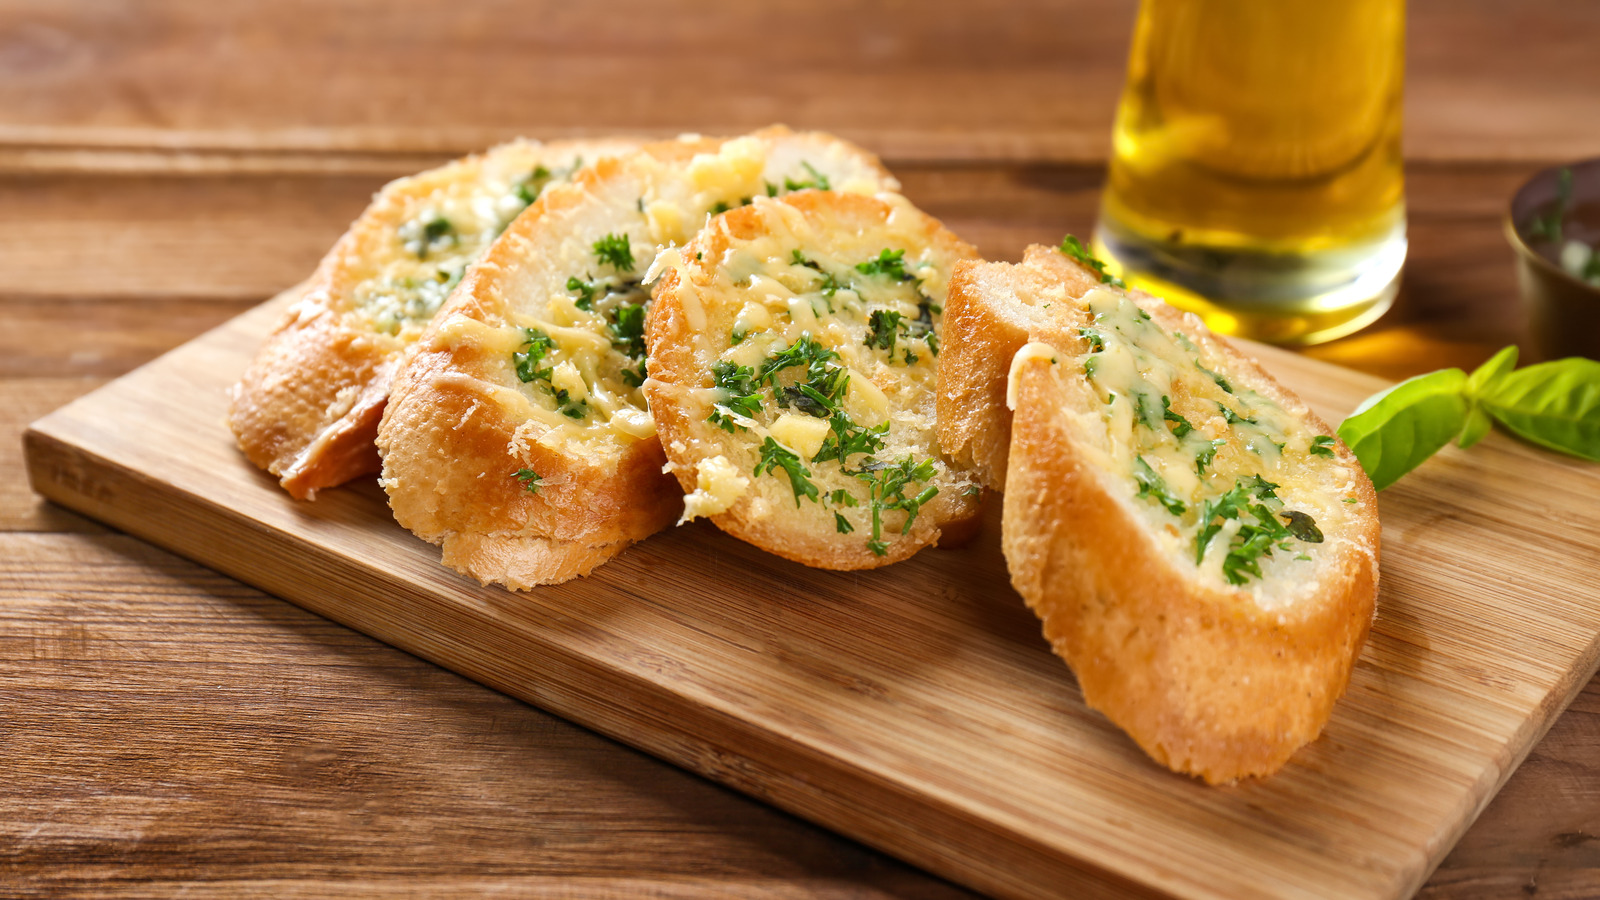 How Long Does Garlic Bread Last In The Freezer?